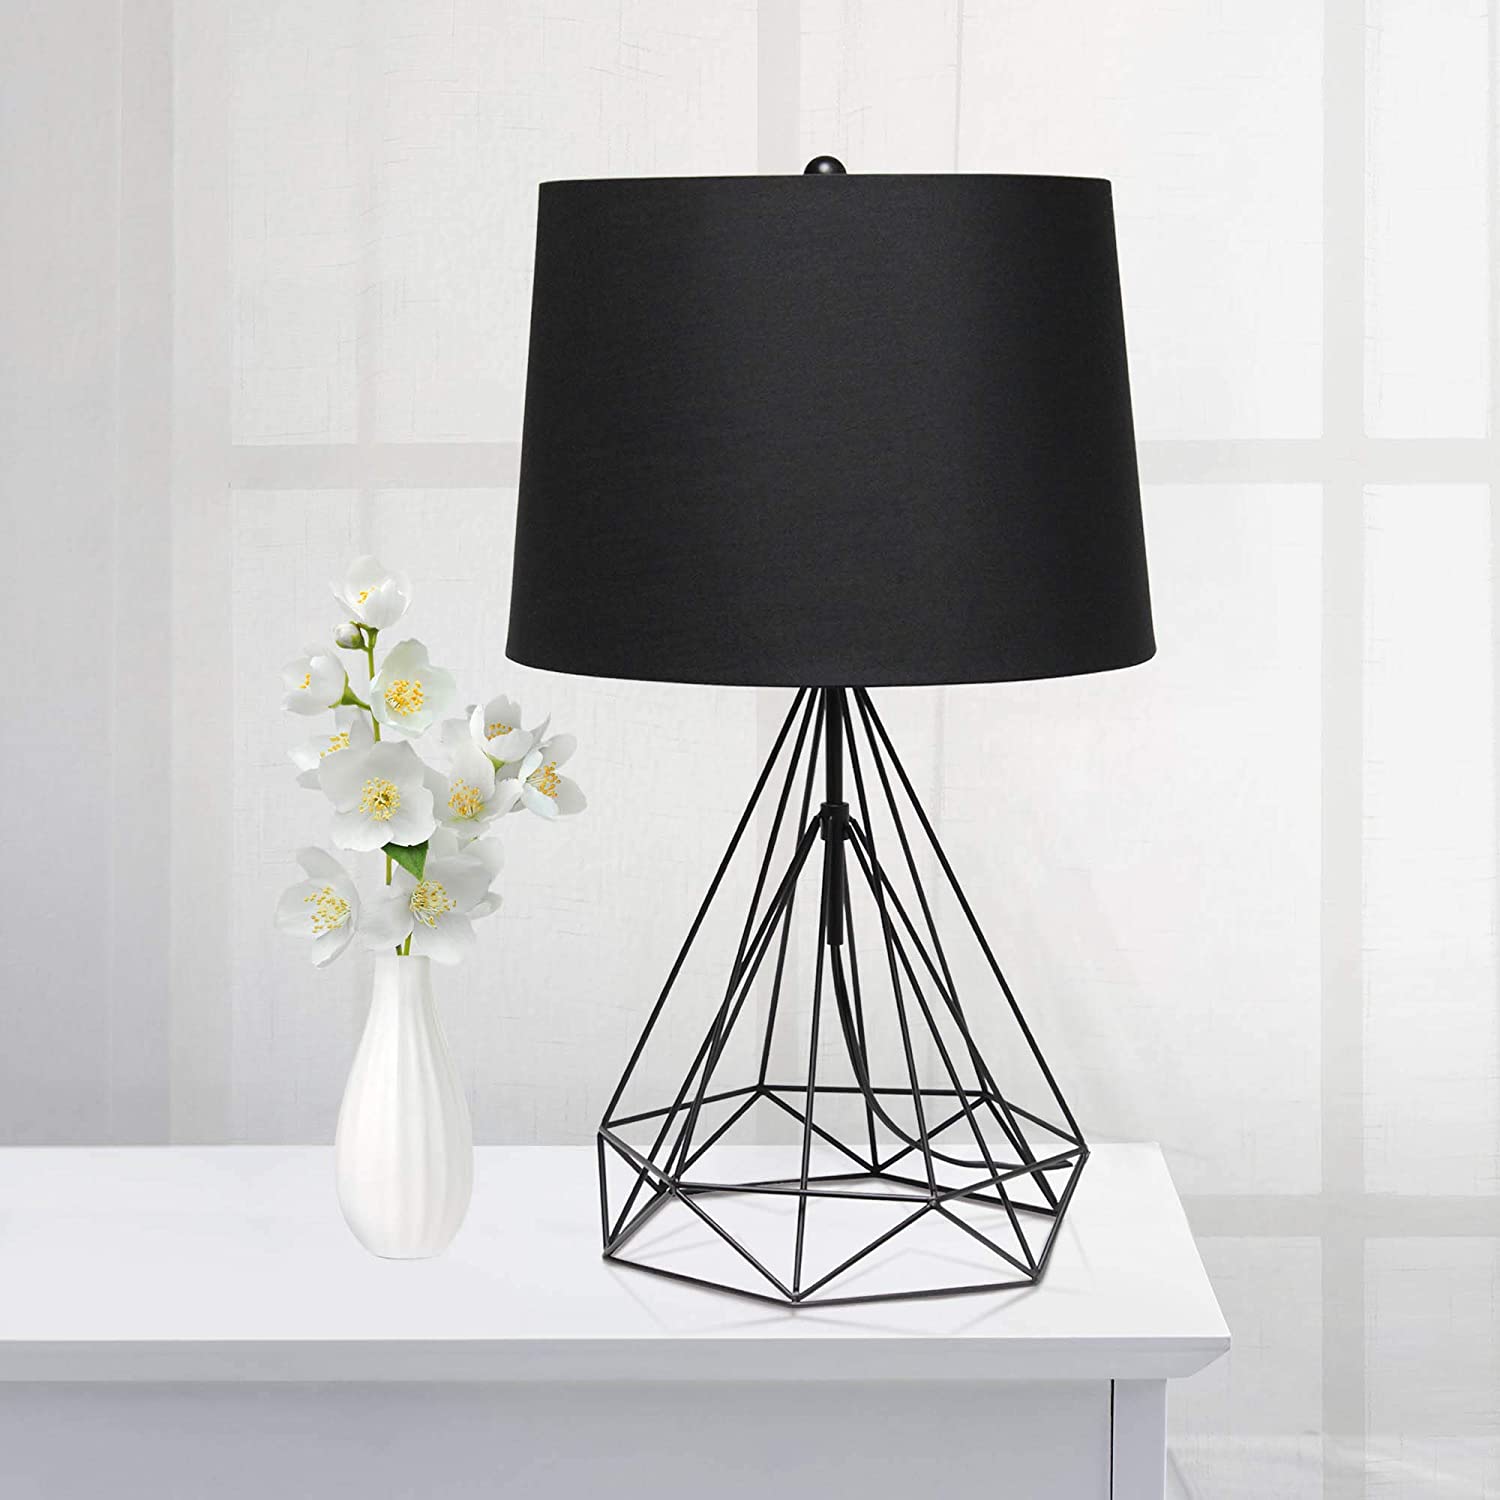 Lalia Home Decorative Geometric Black Matte Wired Table Lamp with Fabric Shade